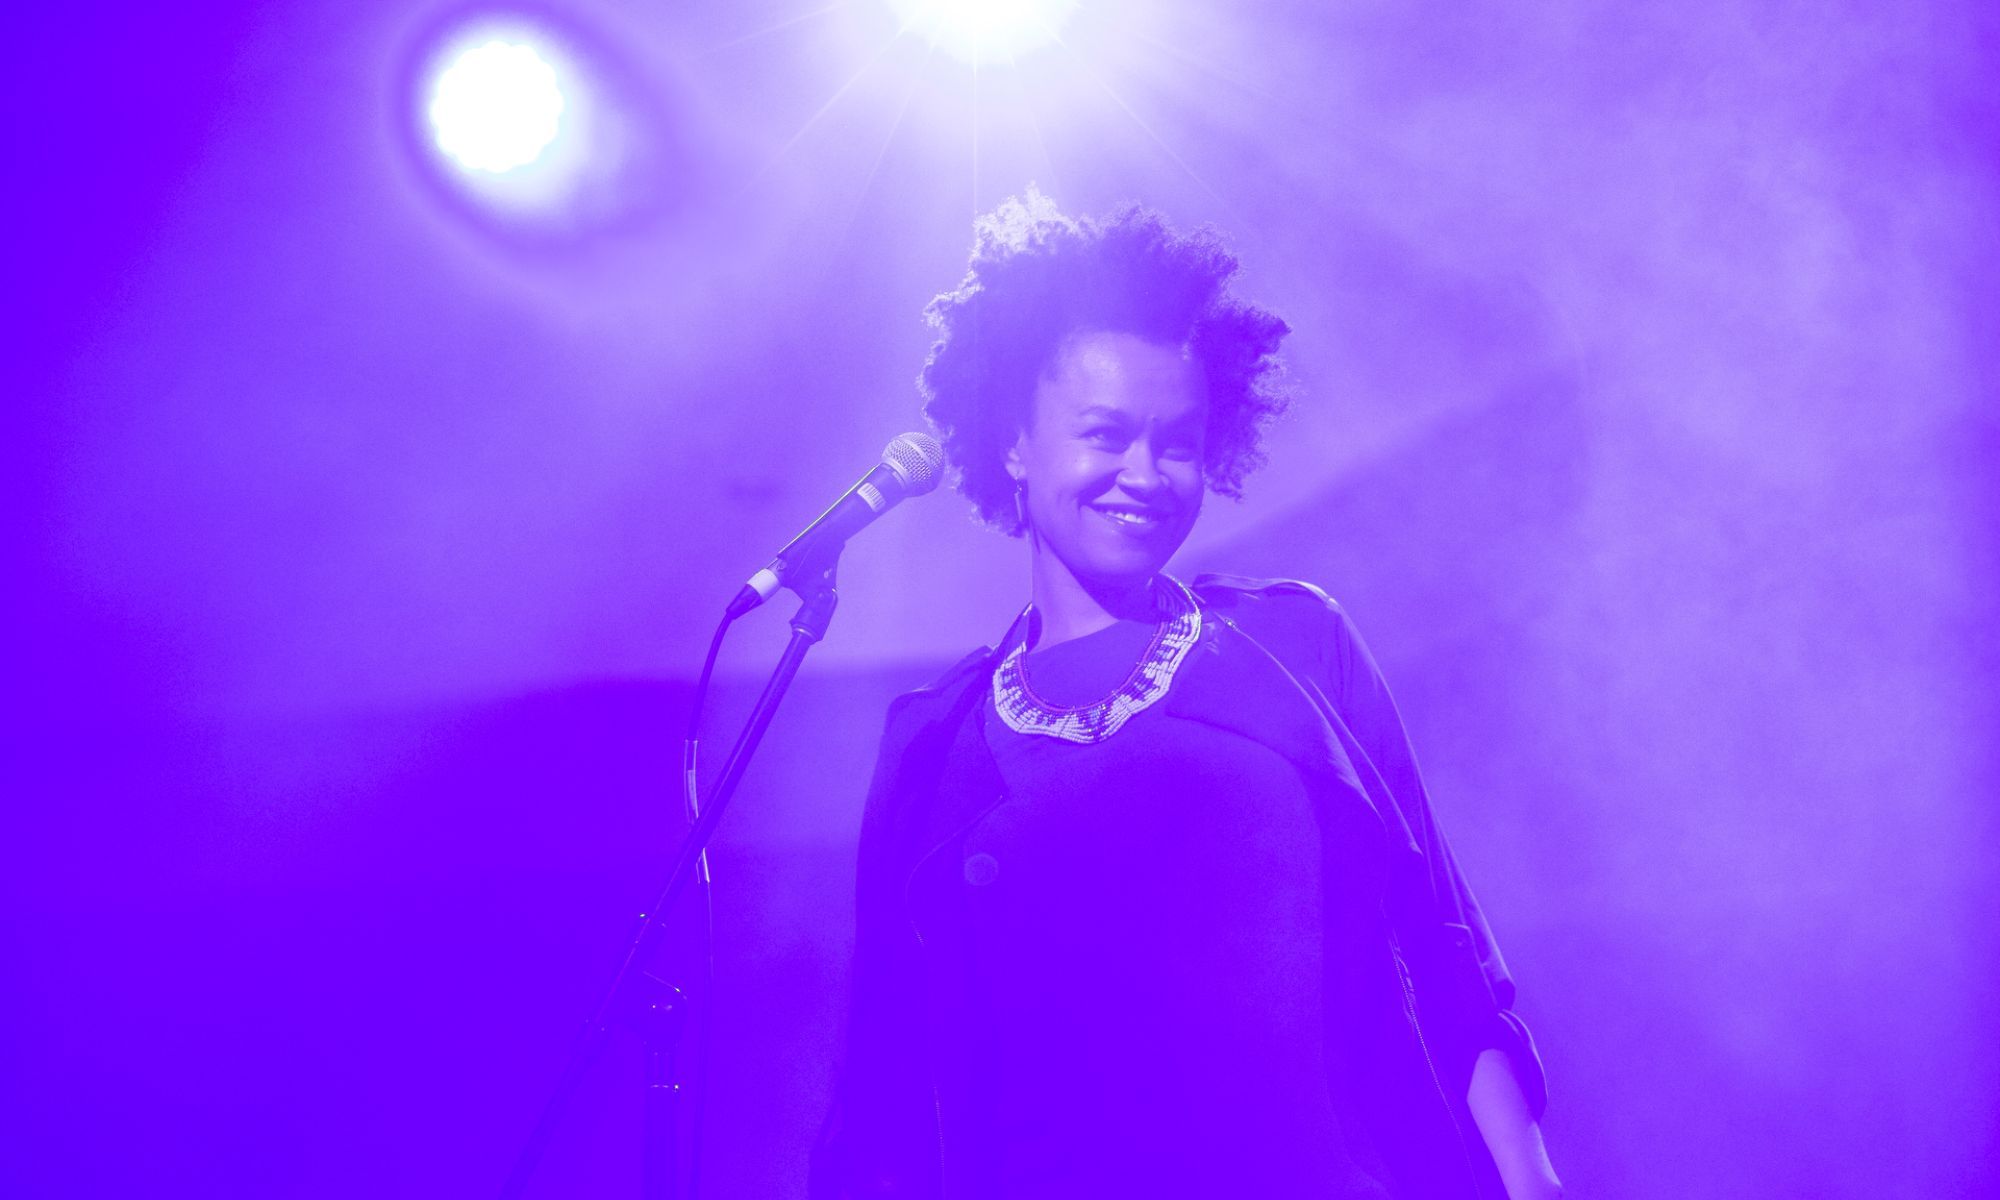 Meklit smiling with a microphone in front of her surrounded by purple lighting